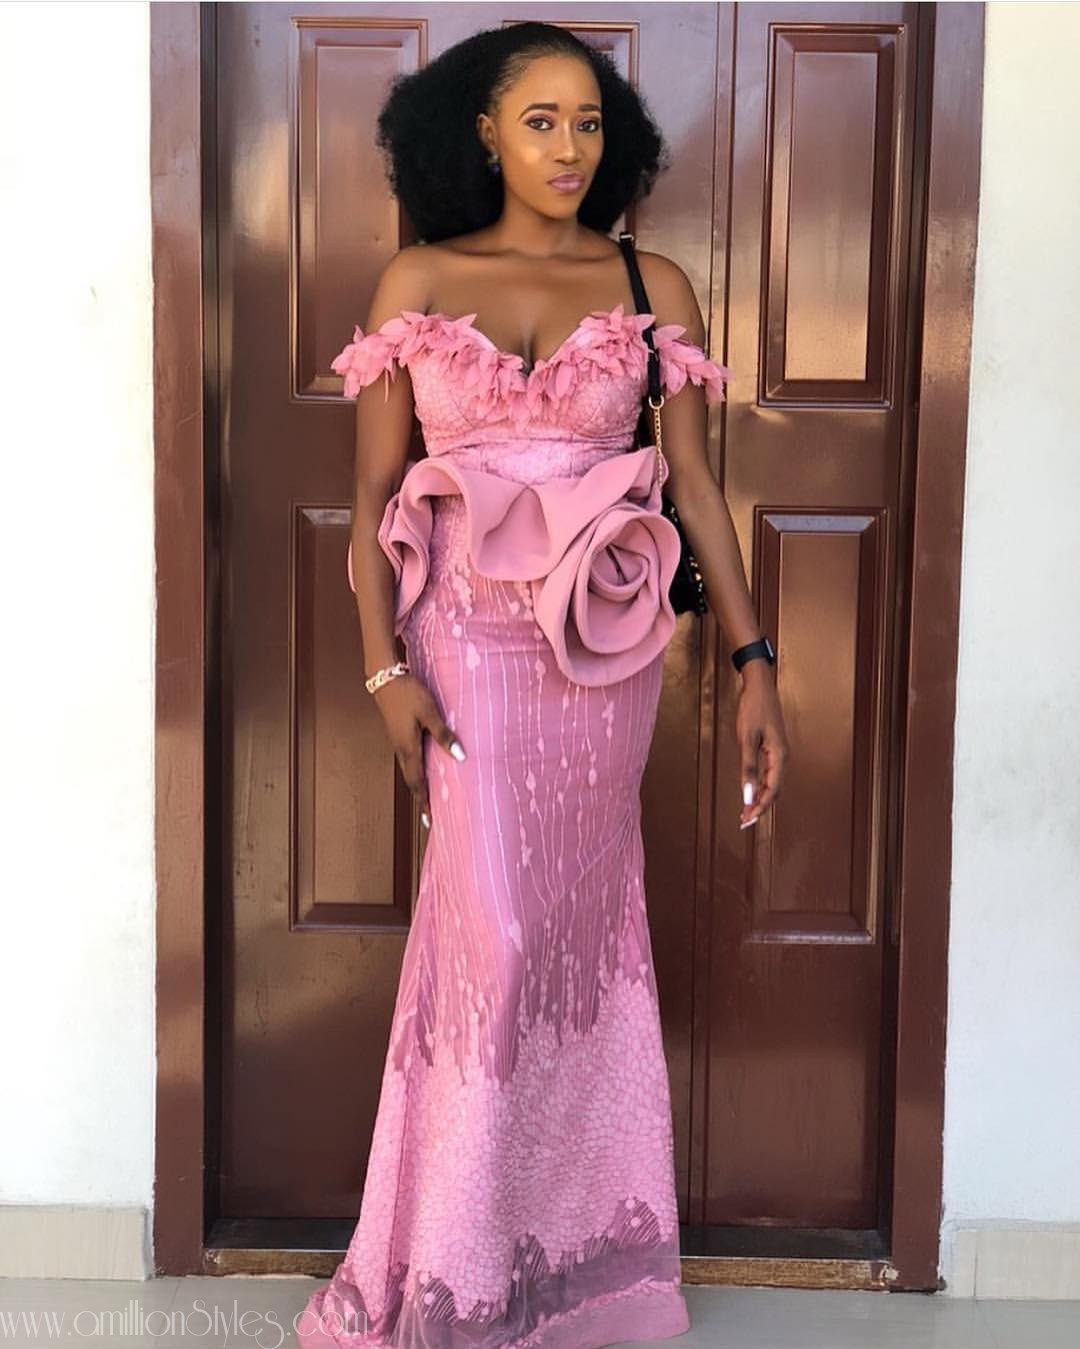 What Are The Chances You Have Come Across These Sleek Asoebi Styles?